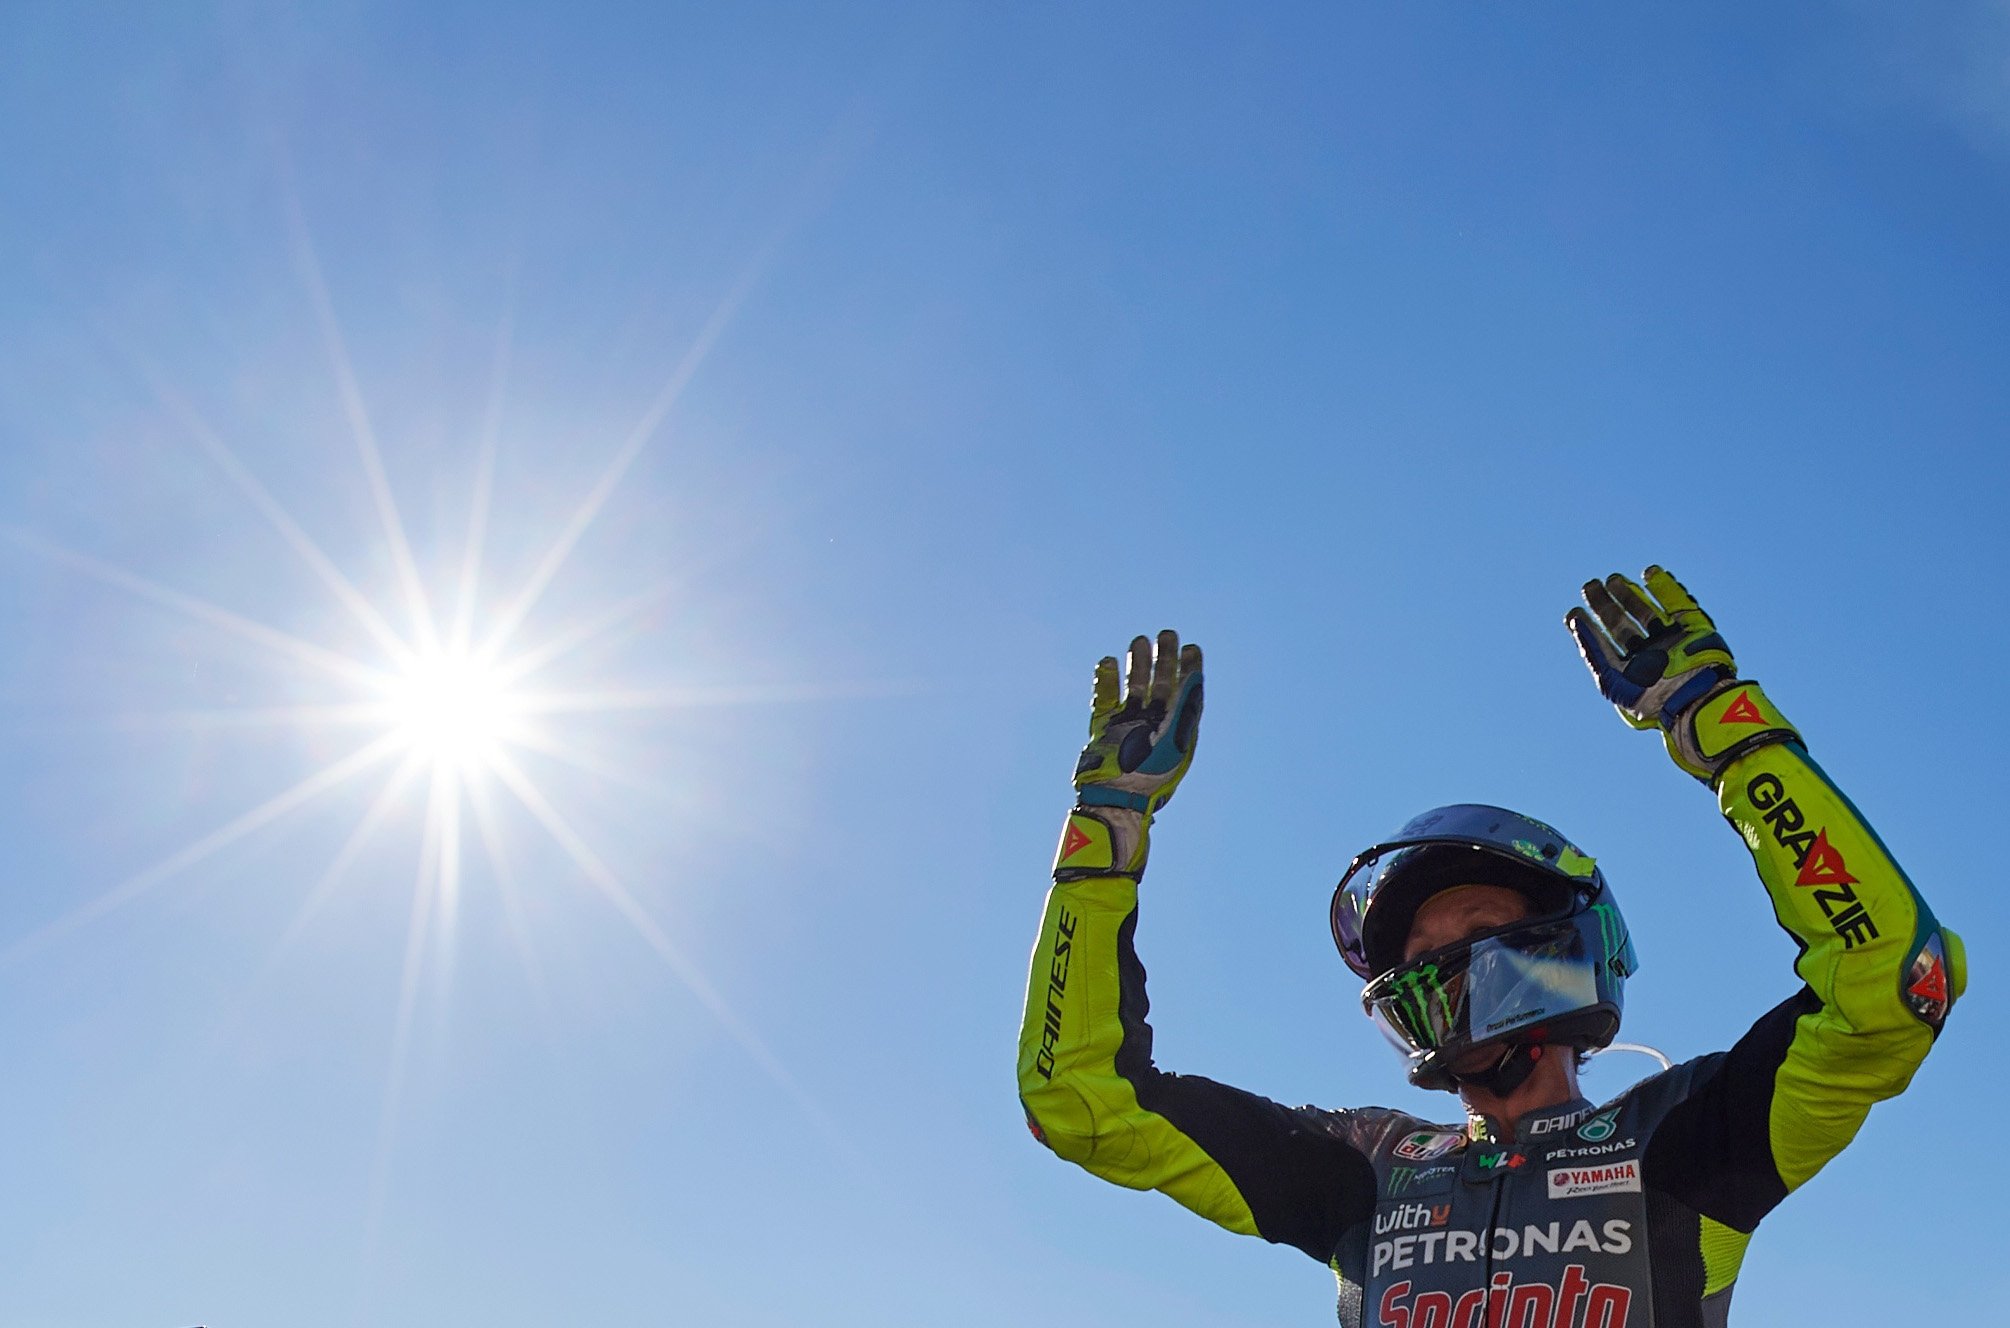 Petronas Yamaha SRT's Valentino Rossi reacts after competing in his last ever race at the Valencia Grand Prix, Cheste, Spain, Nov. 14, 2021.